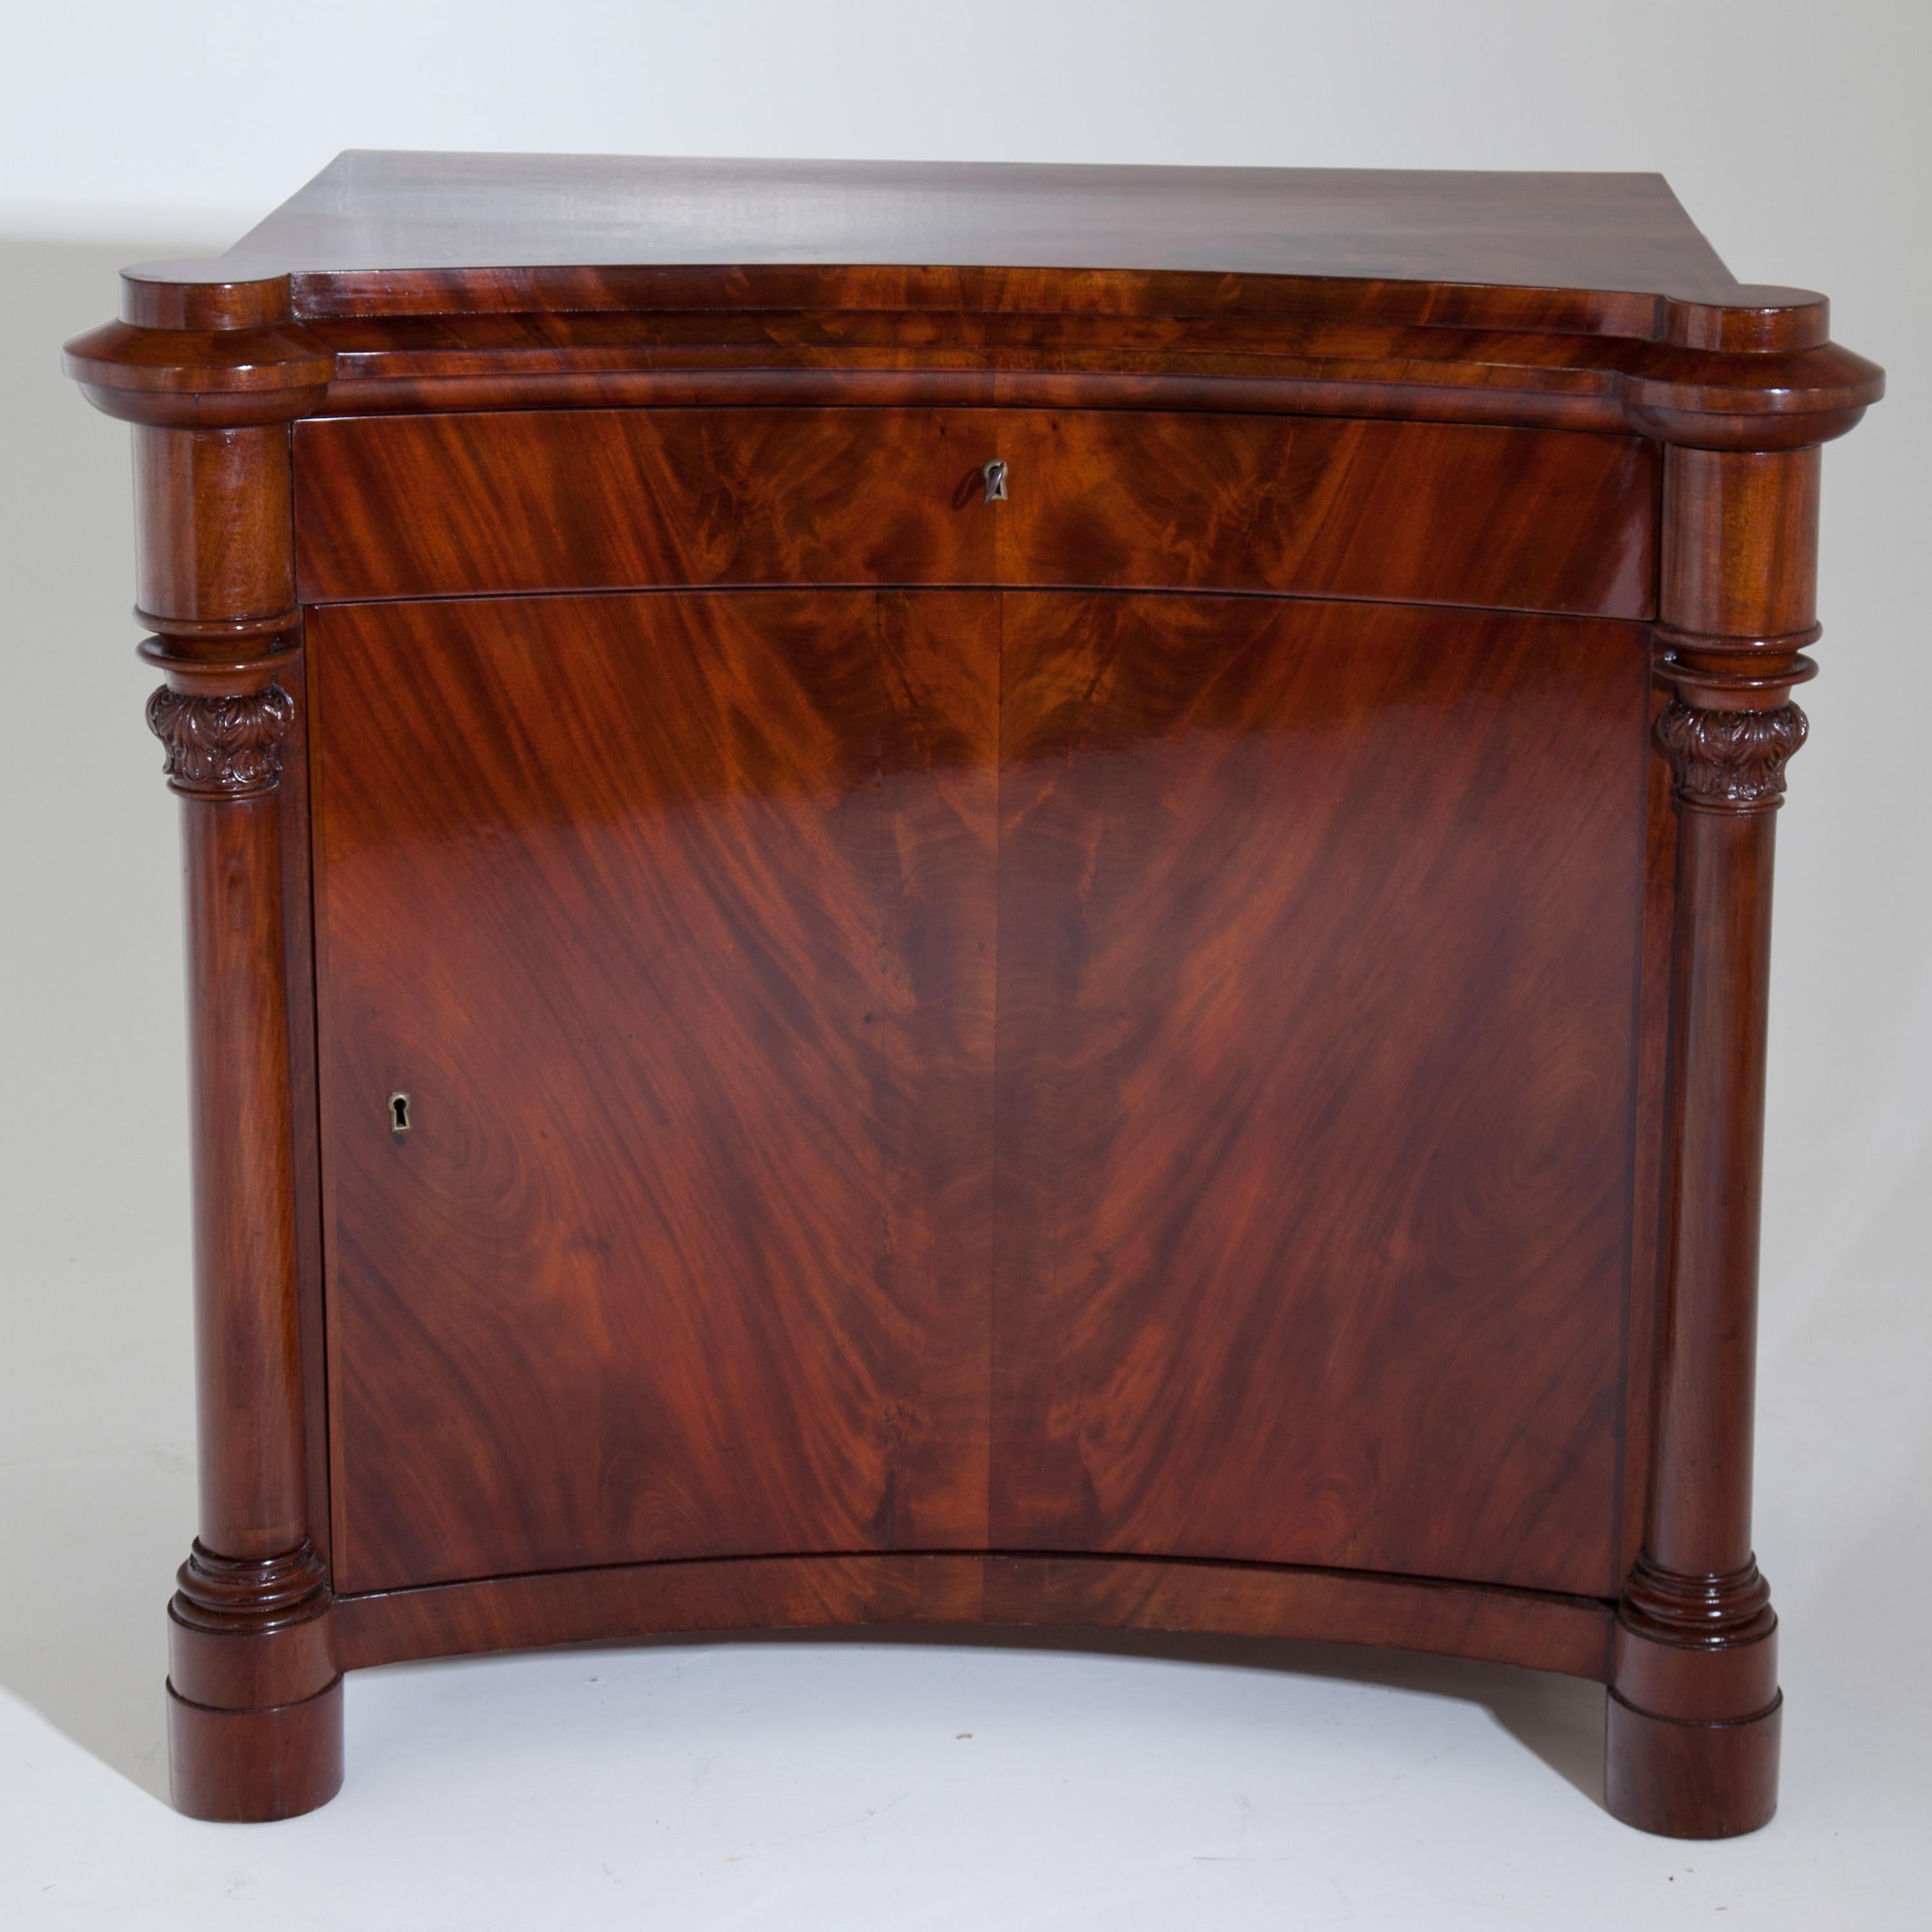 Cabinet with concave curved front and lateral three-quarter-columns with leaf capitals and profiled bases. One-drawer and one-door under the profiled top panel. Mahogany, solid and veneered.
        